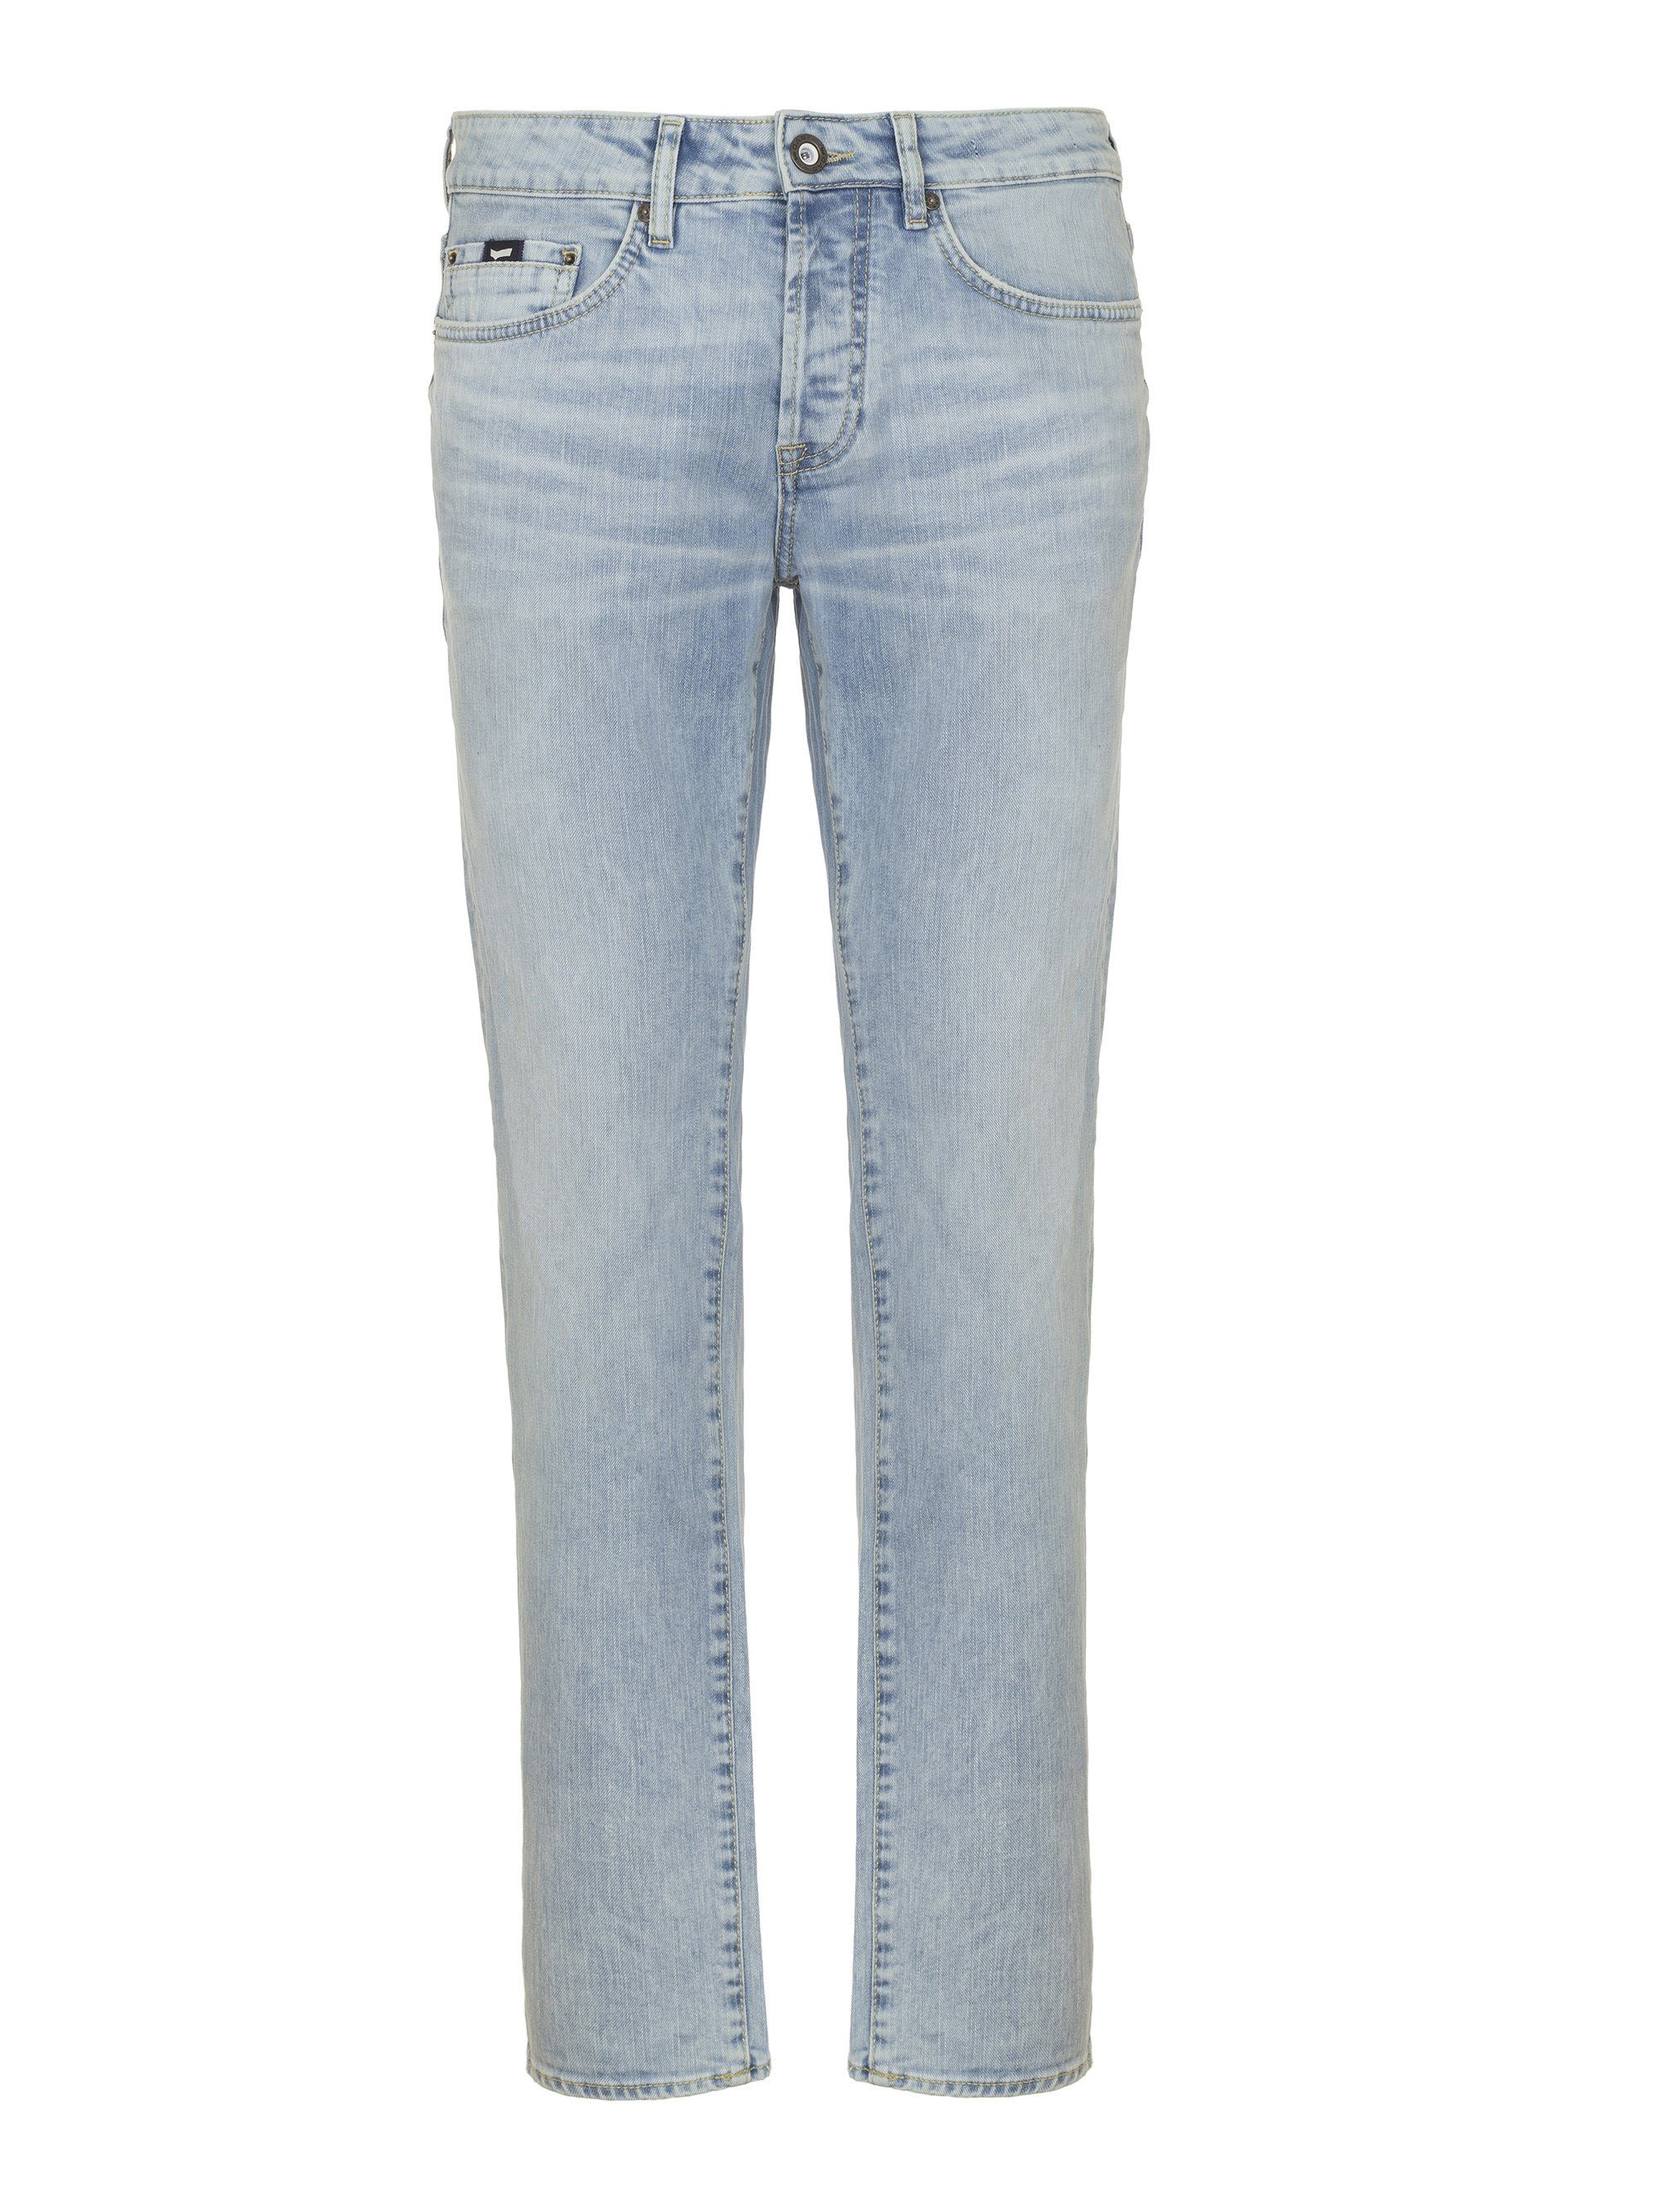 GAS Slim-fit-Jeans super Super-Bleached-Waschung mit bleach wash ANDERS